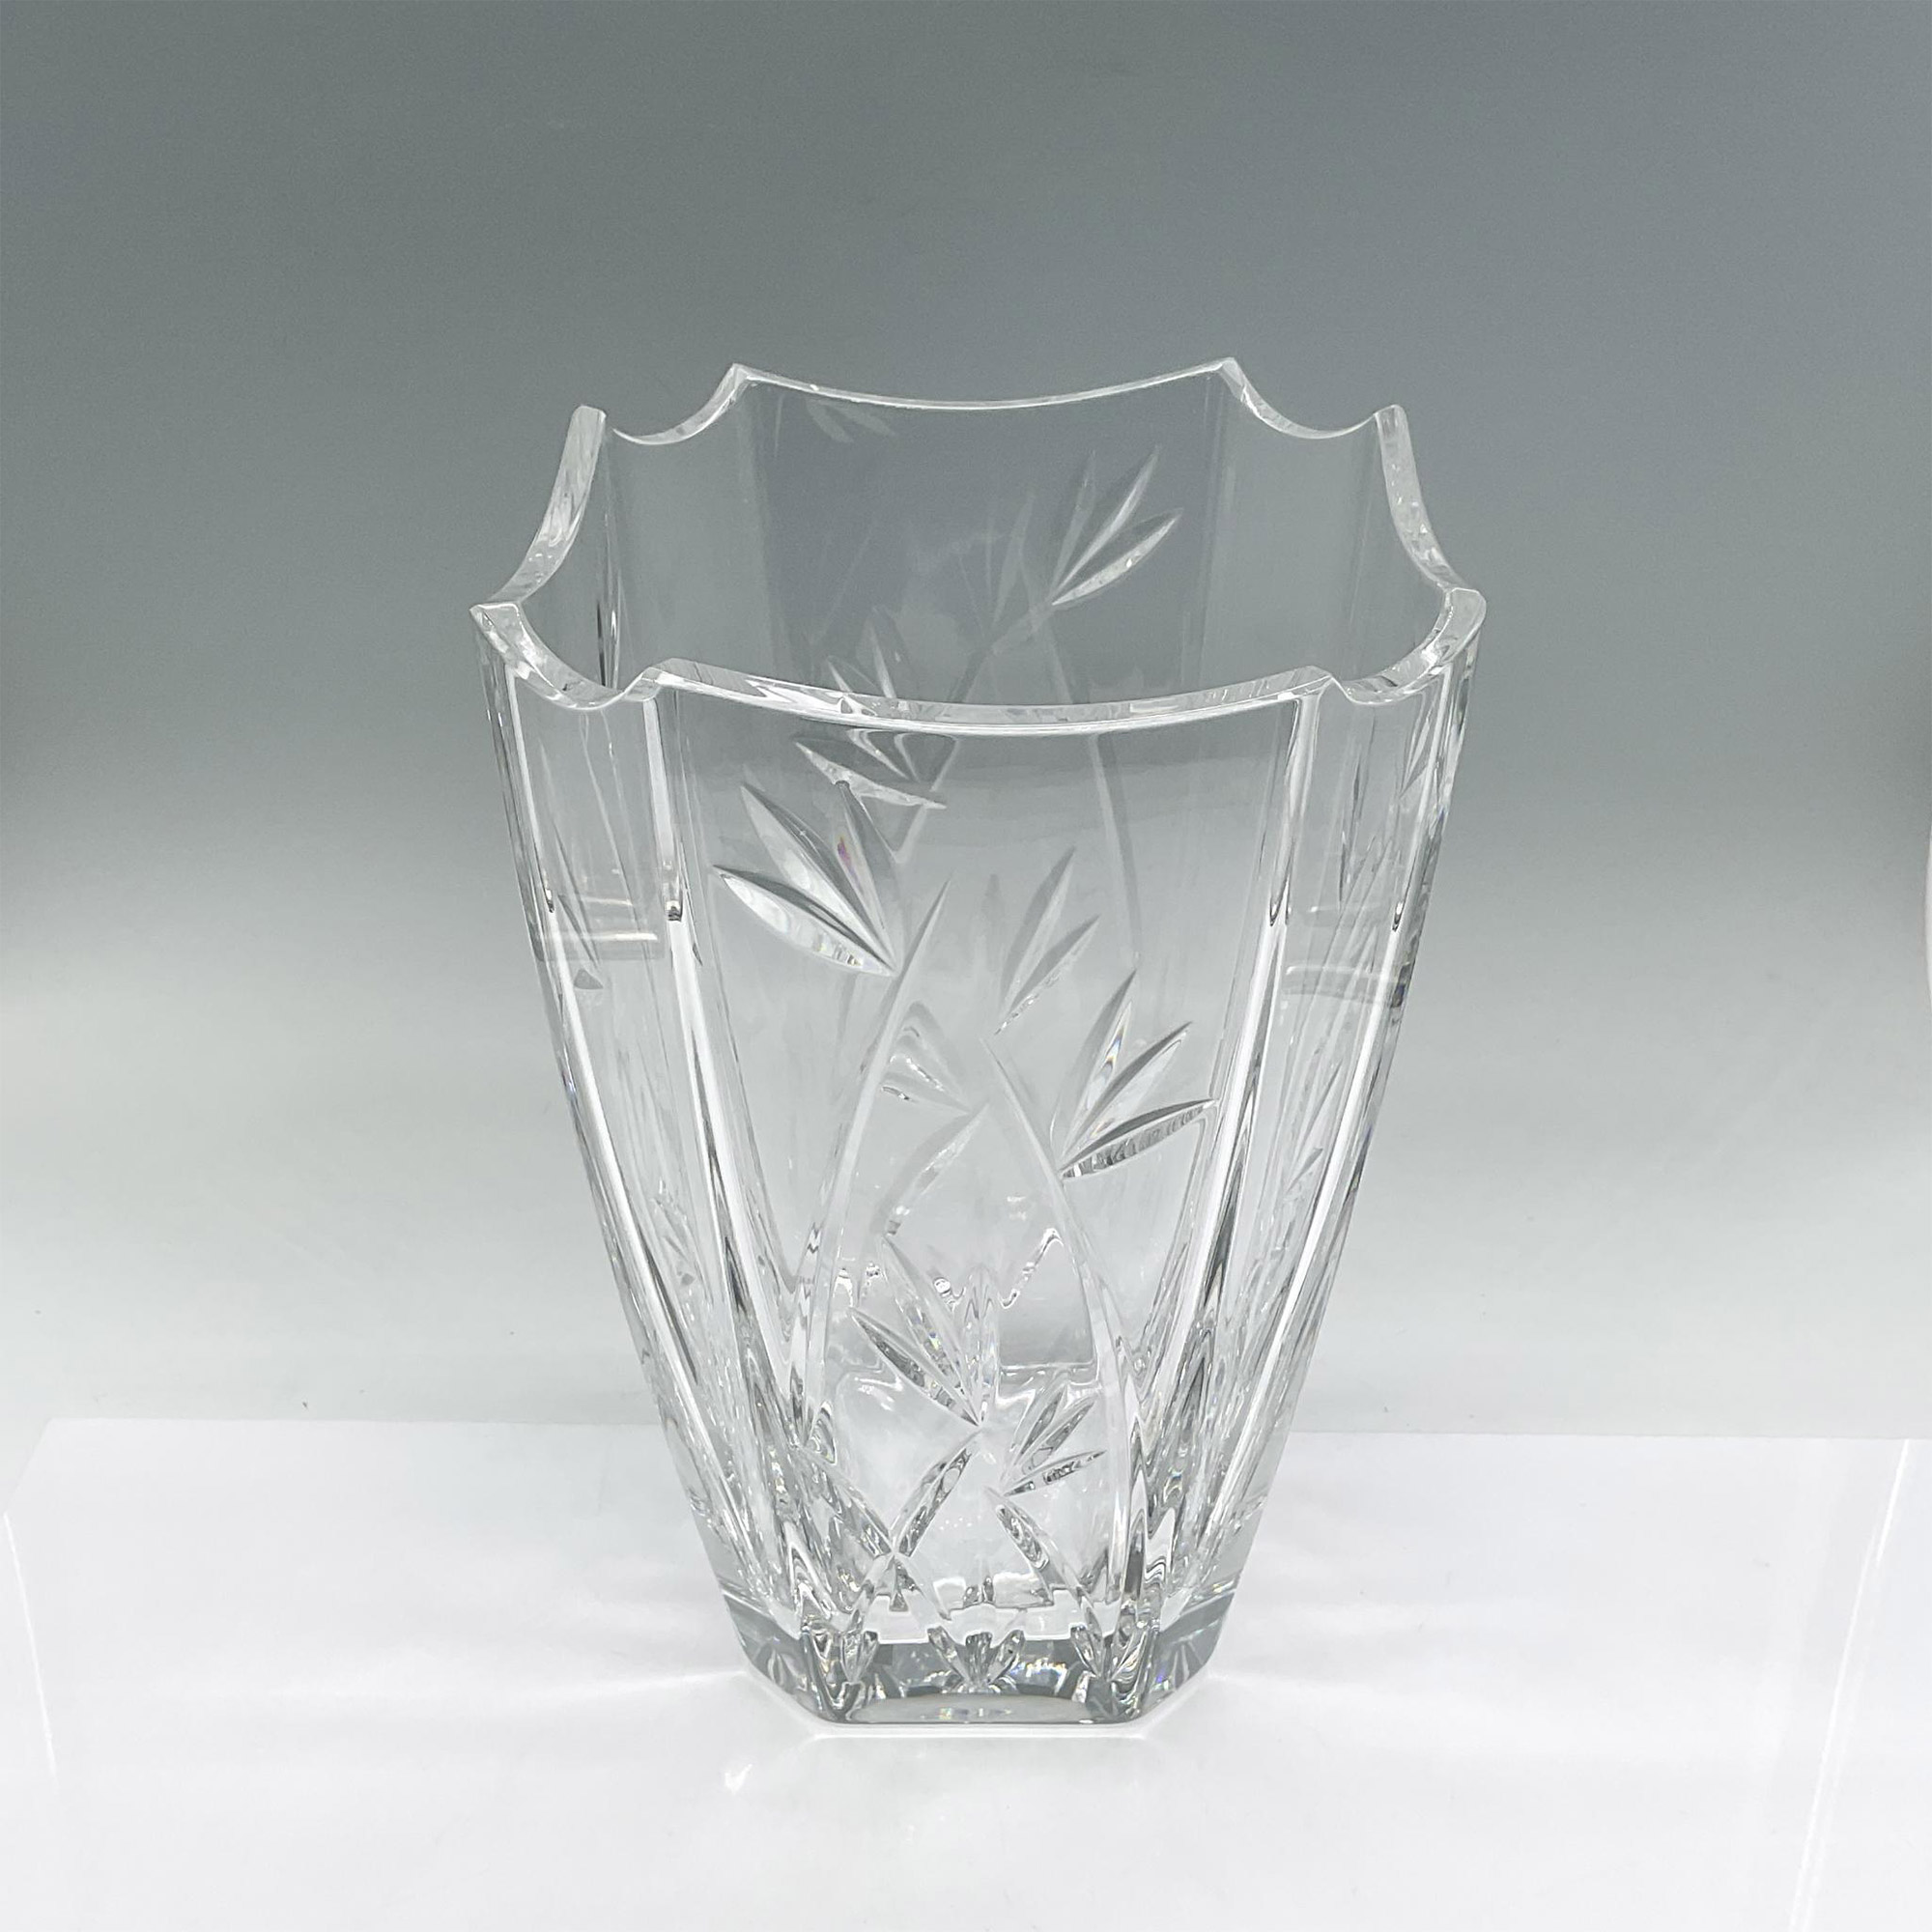 Waterford Crystal Vase, Bamboo Pattern - Image 2 of 3